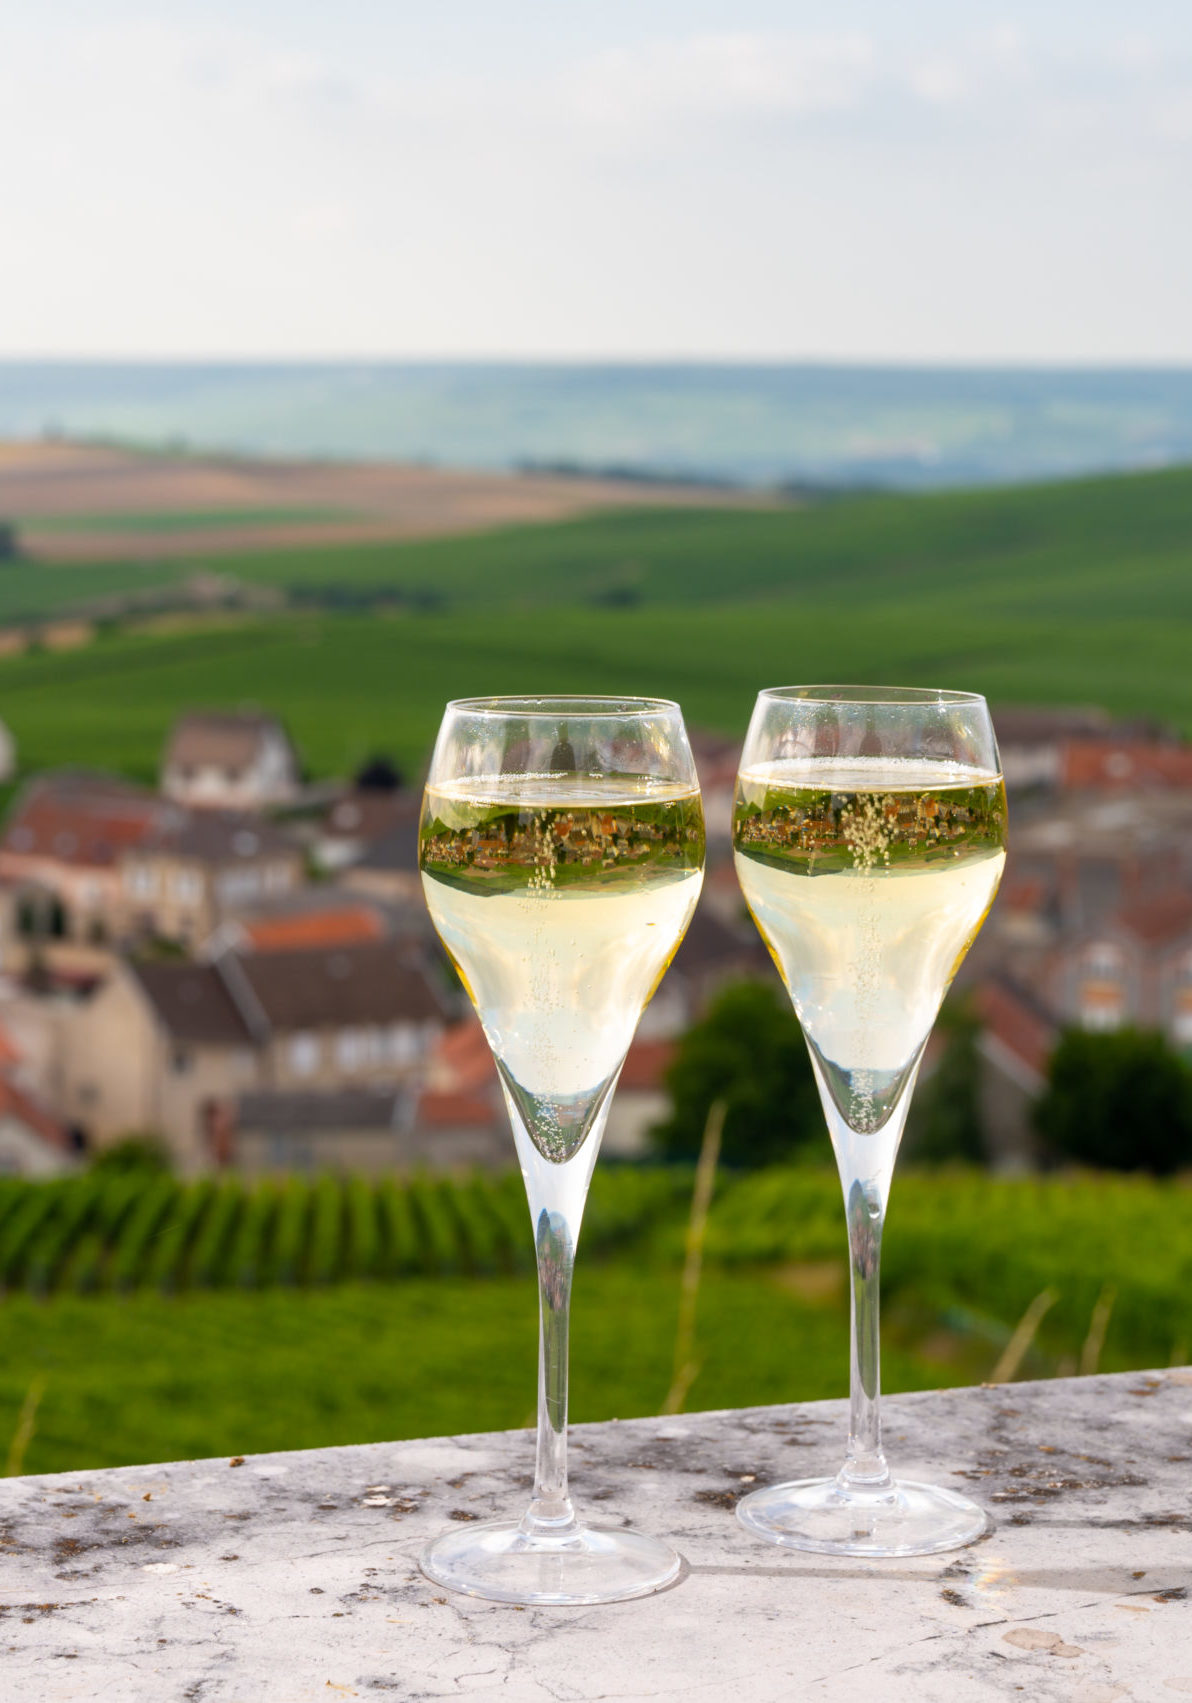 Tasting of brut and demi-sec white champagne sparkling wine from special flute glasses with view on green Champagne vineyards, France